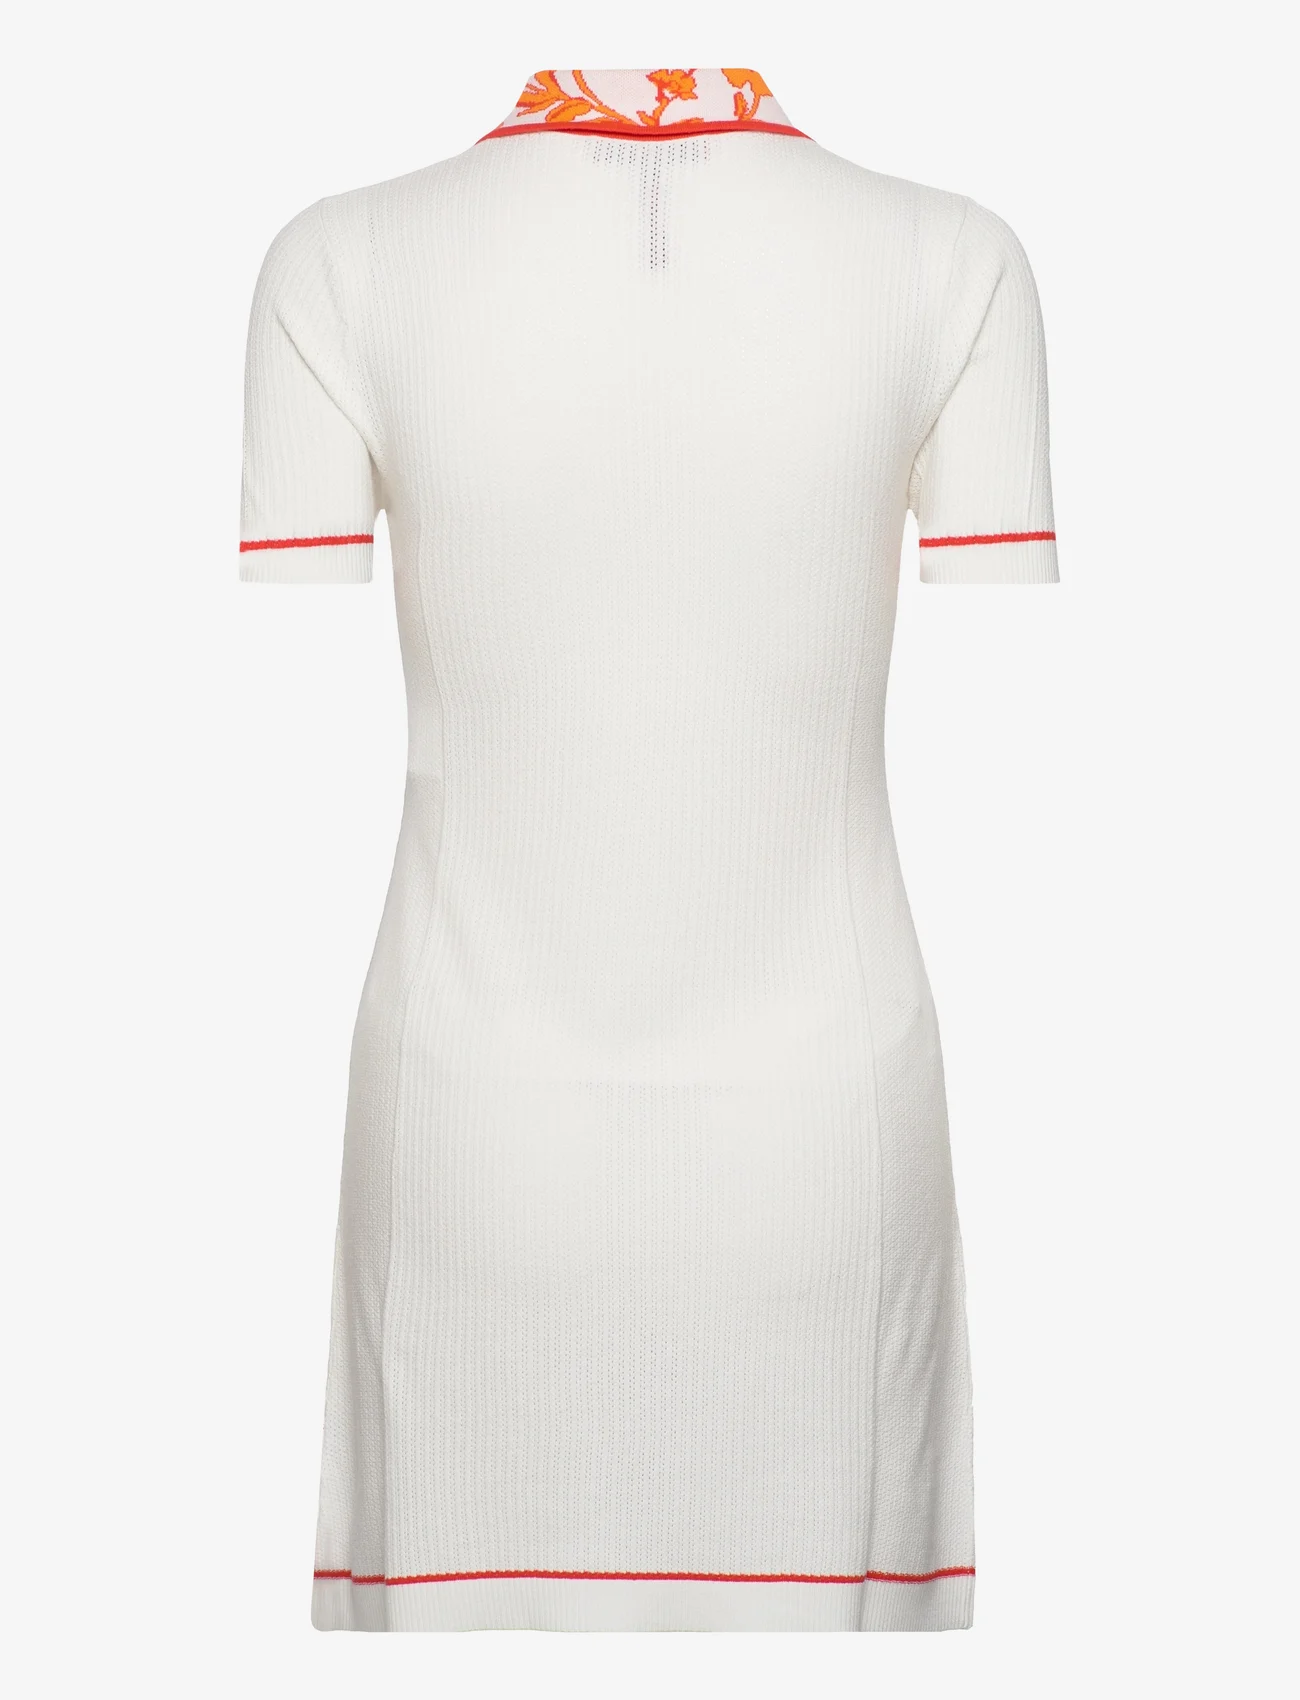 Max&Co. - ALLEY - t-shirt dresses - ivory pattern - 1